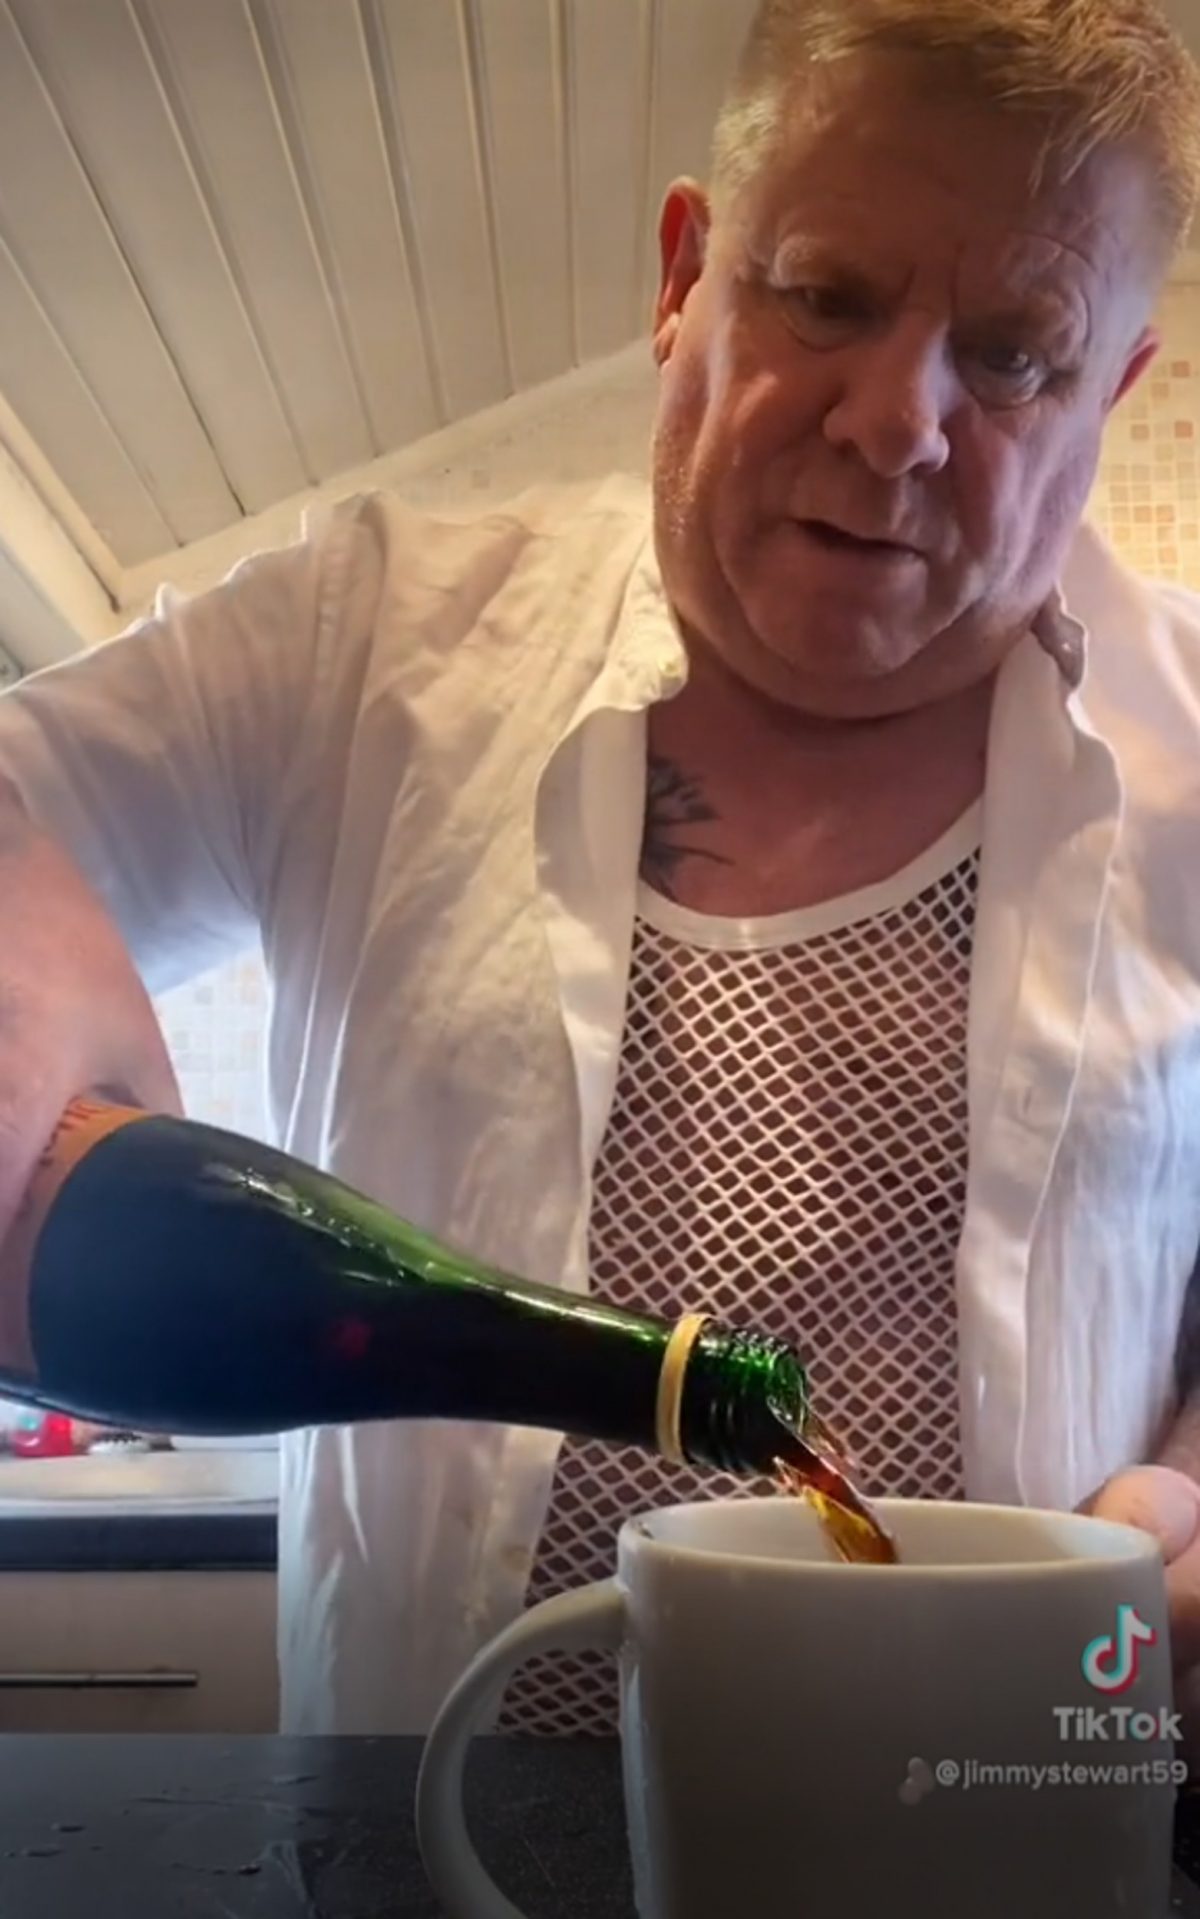 Jimmy pours Buckfast into his drink